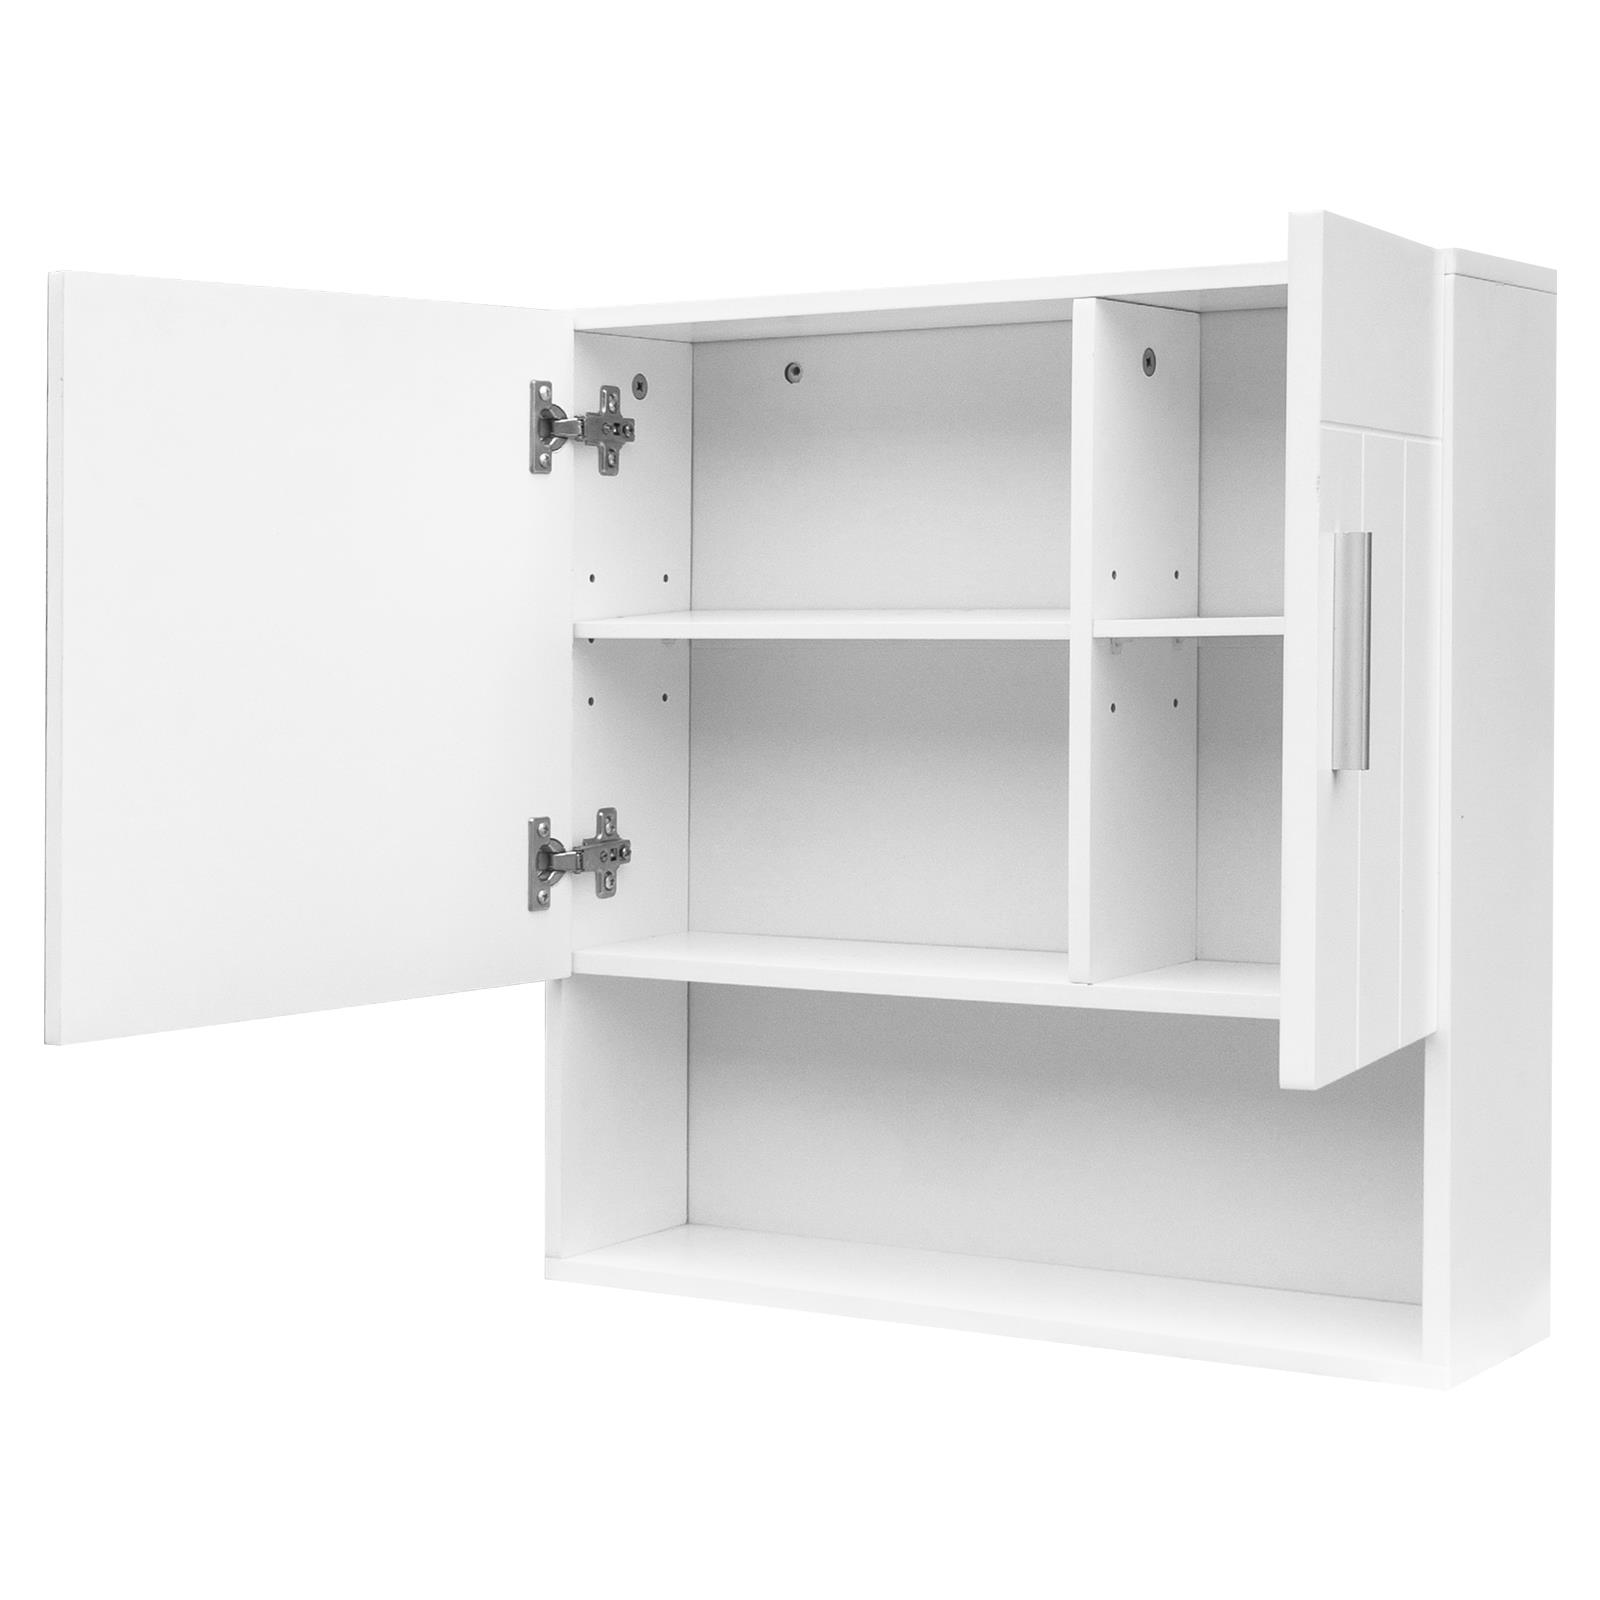 GoDecor Wall Storage Cabinet with mirror Doors and Shelf, Mirrored Wall Mounted Medicine Cabinet for Bathroom, White - image 4 of 5